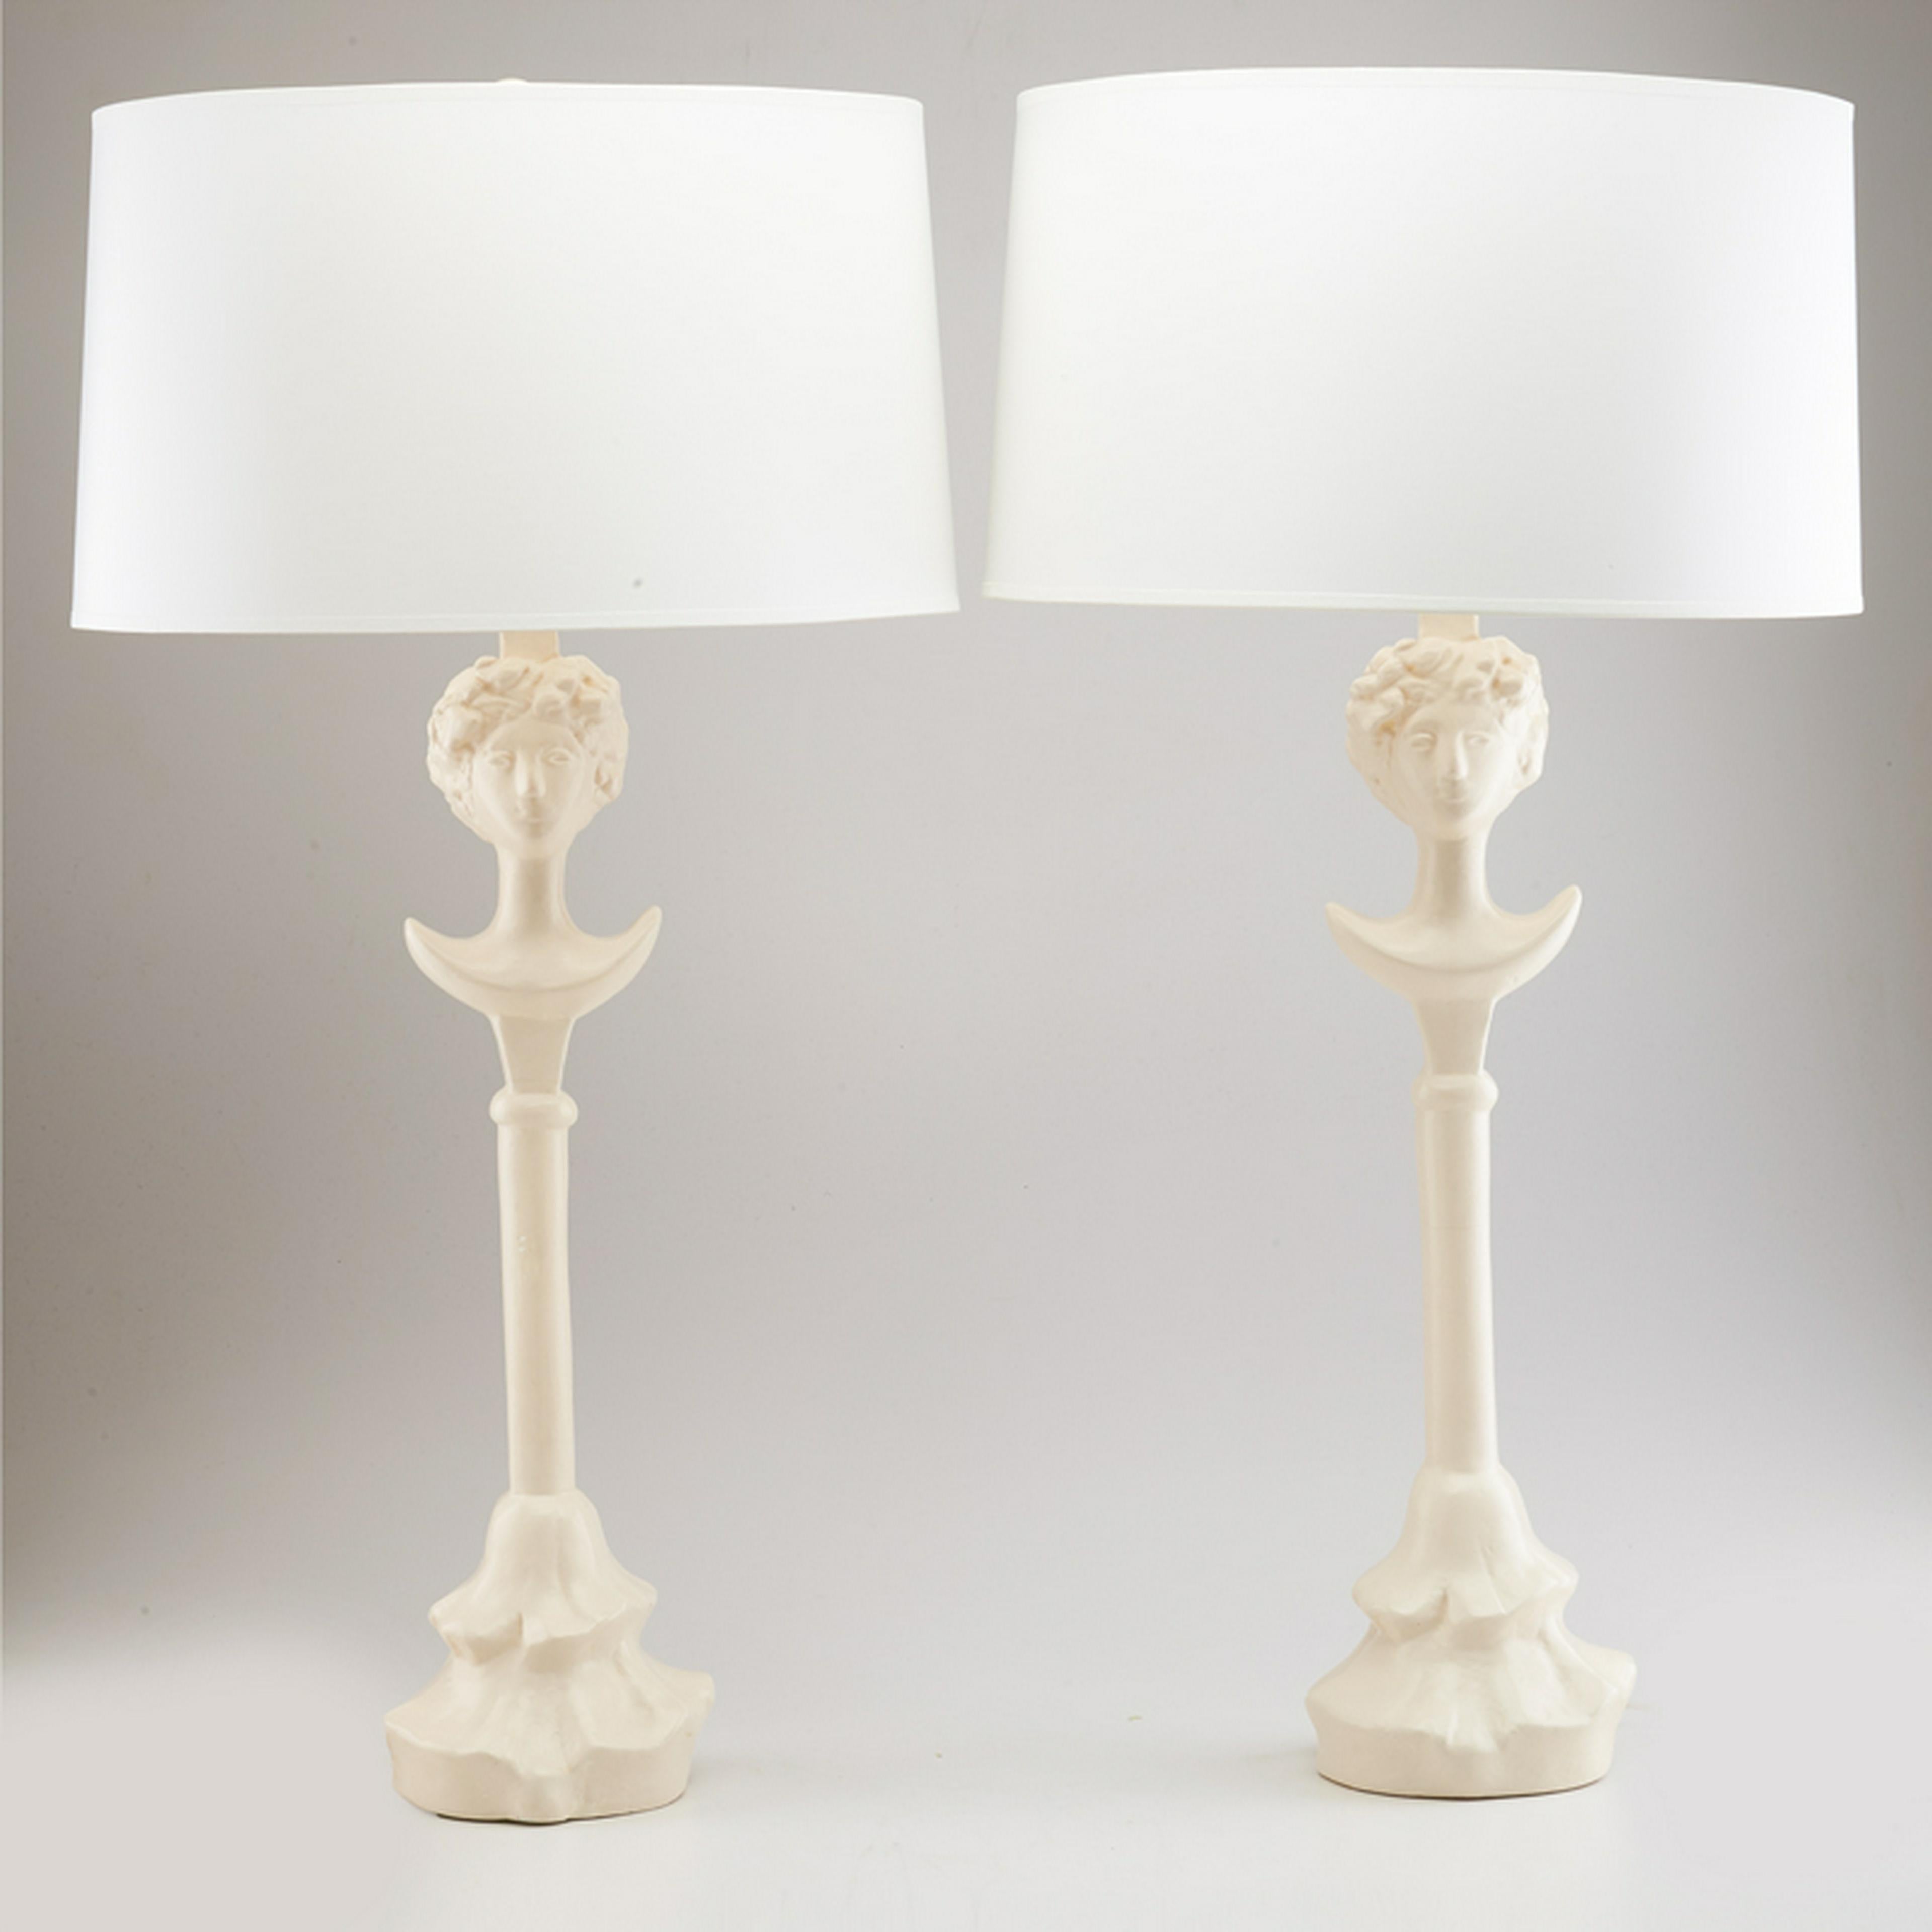 Pair of Vintage Painted Plaster Tête de Femme Lamps, after Diego Giacometti For Sale 2